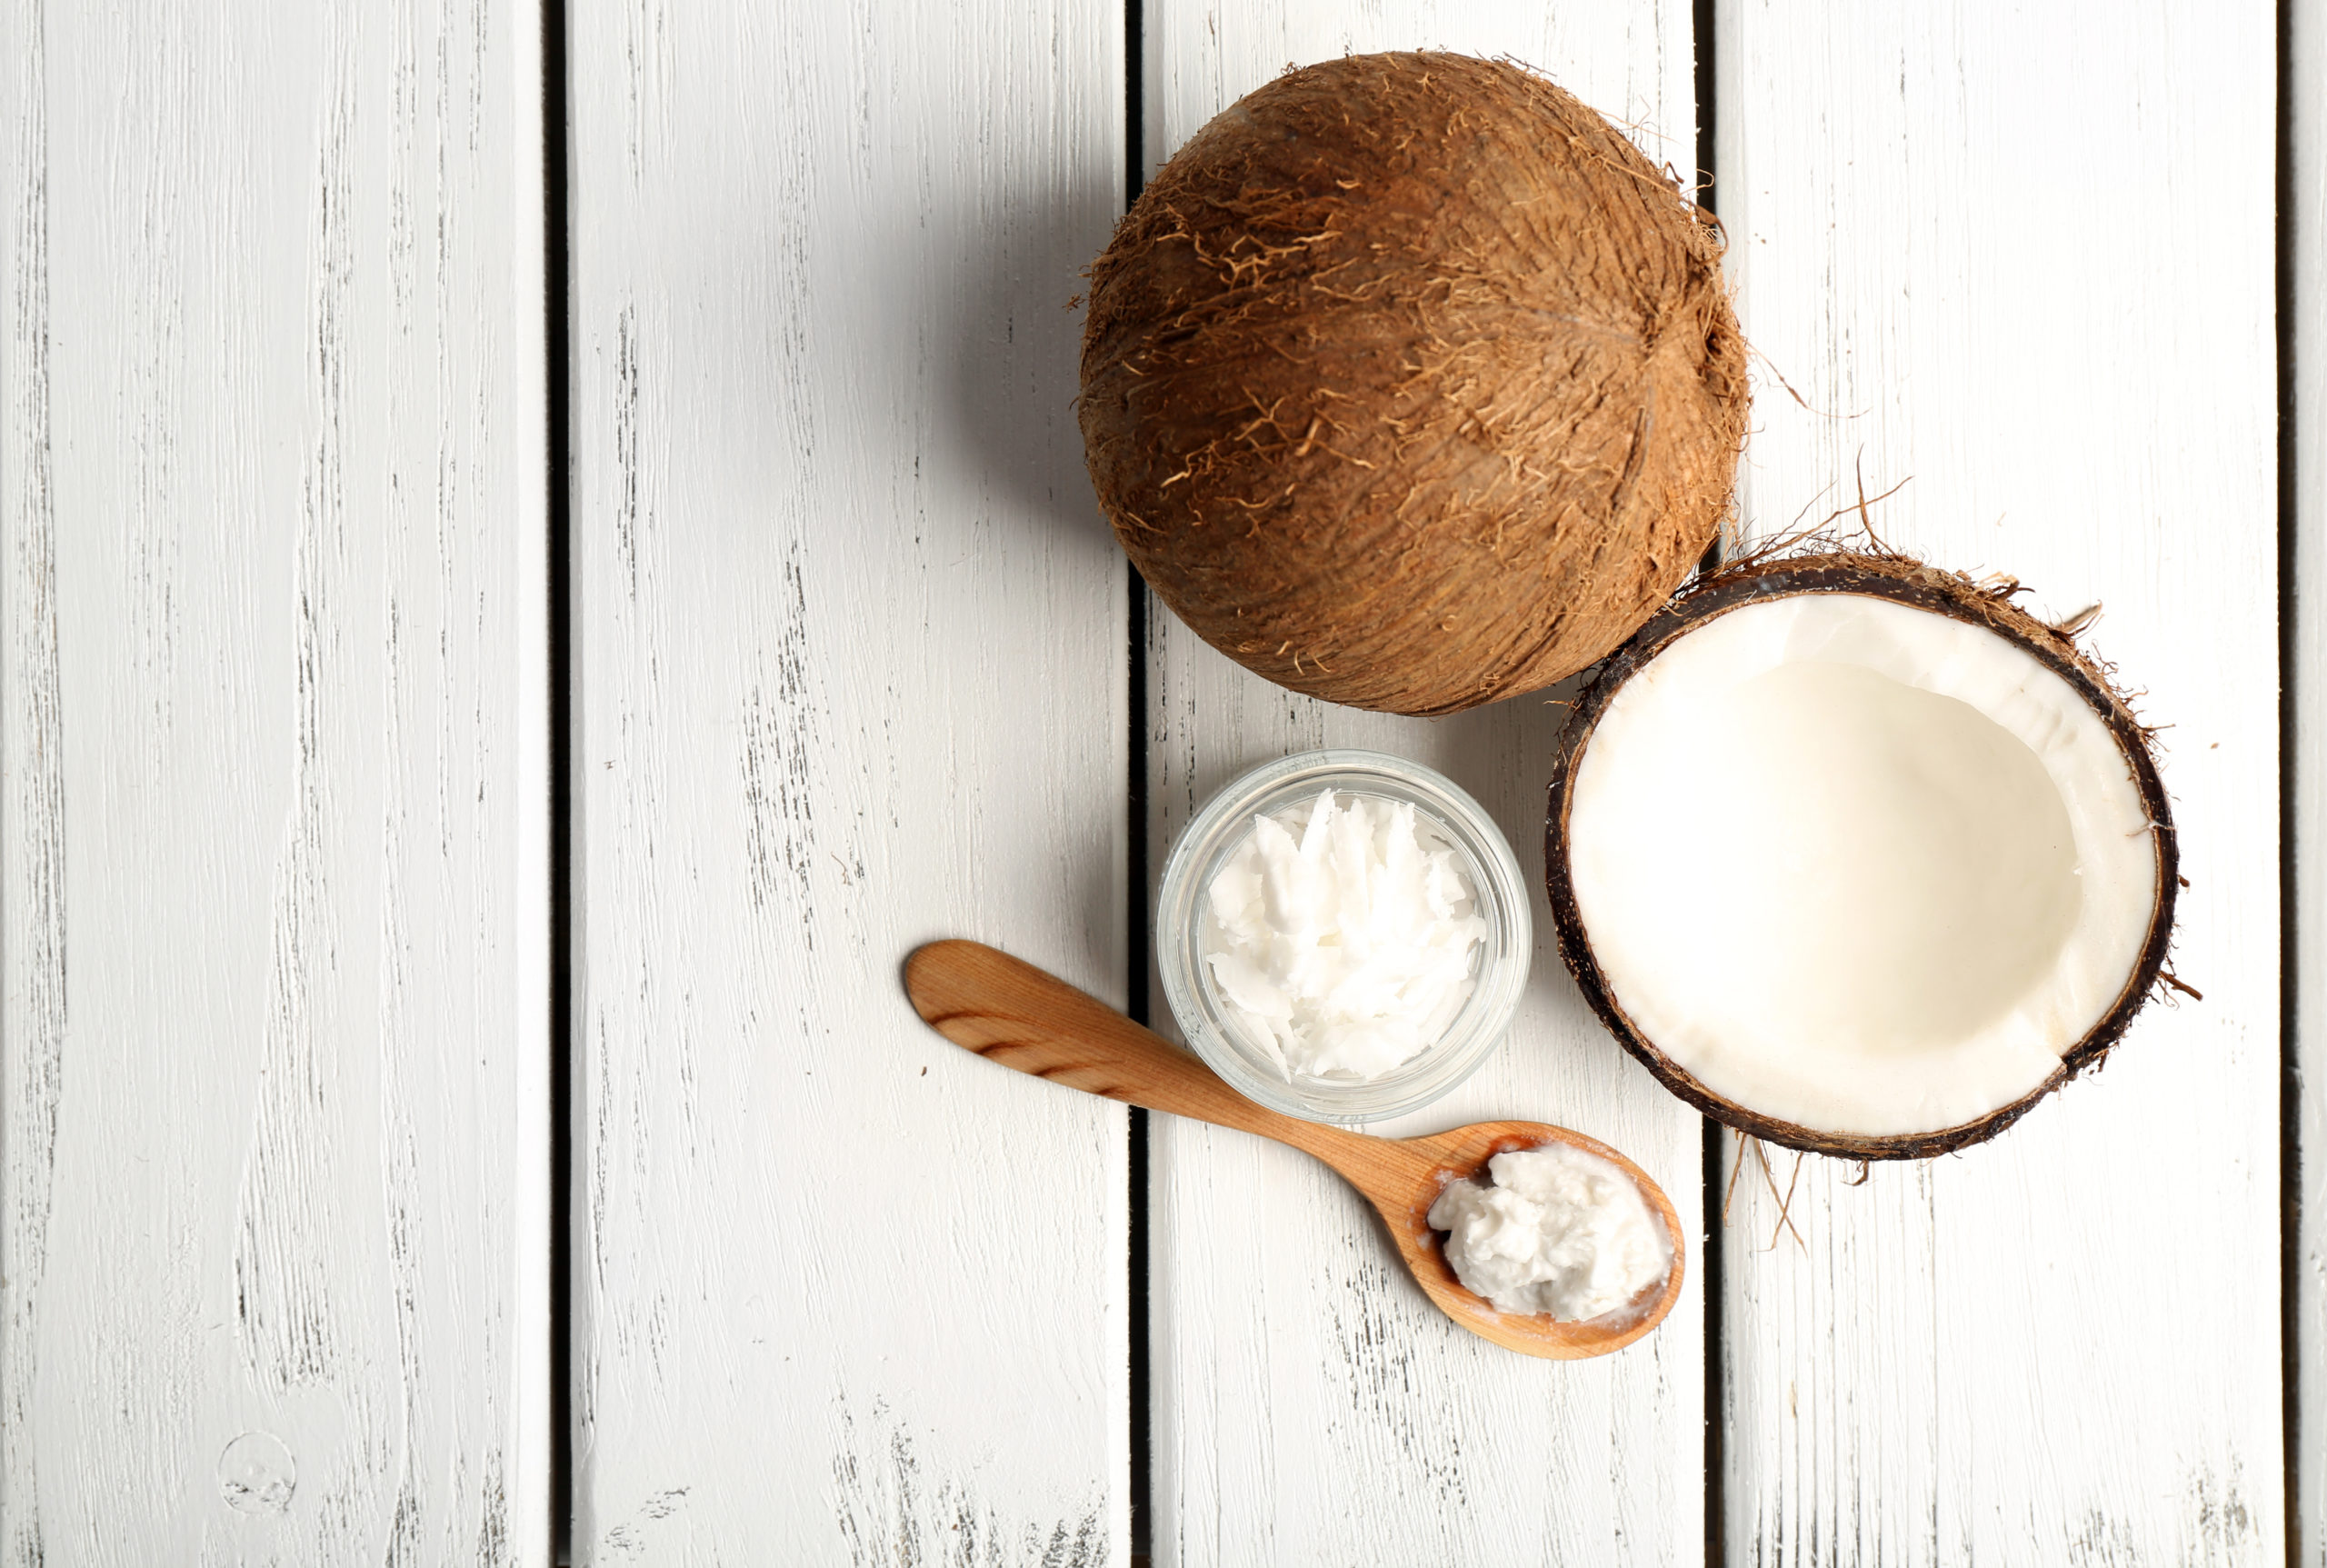 THE NEW AGE OF COCONUT OIL